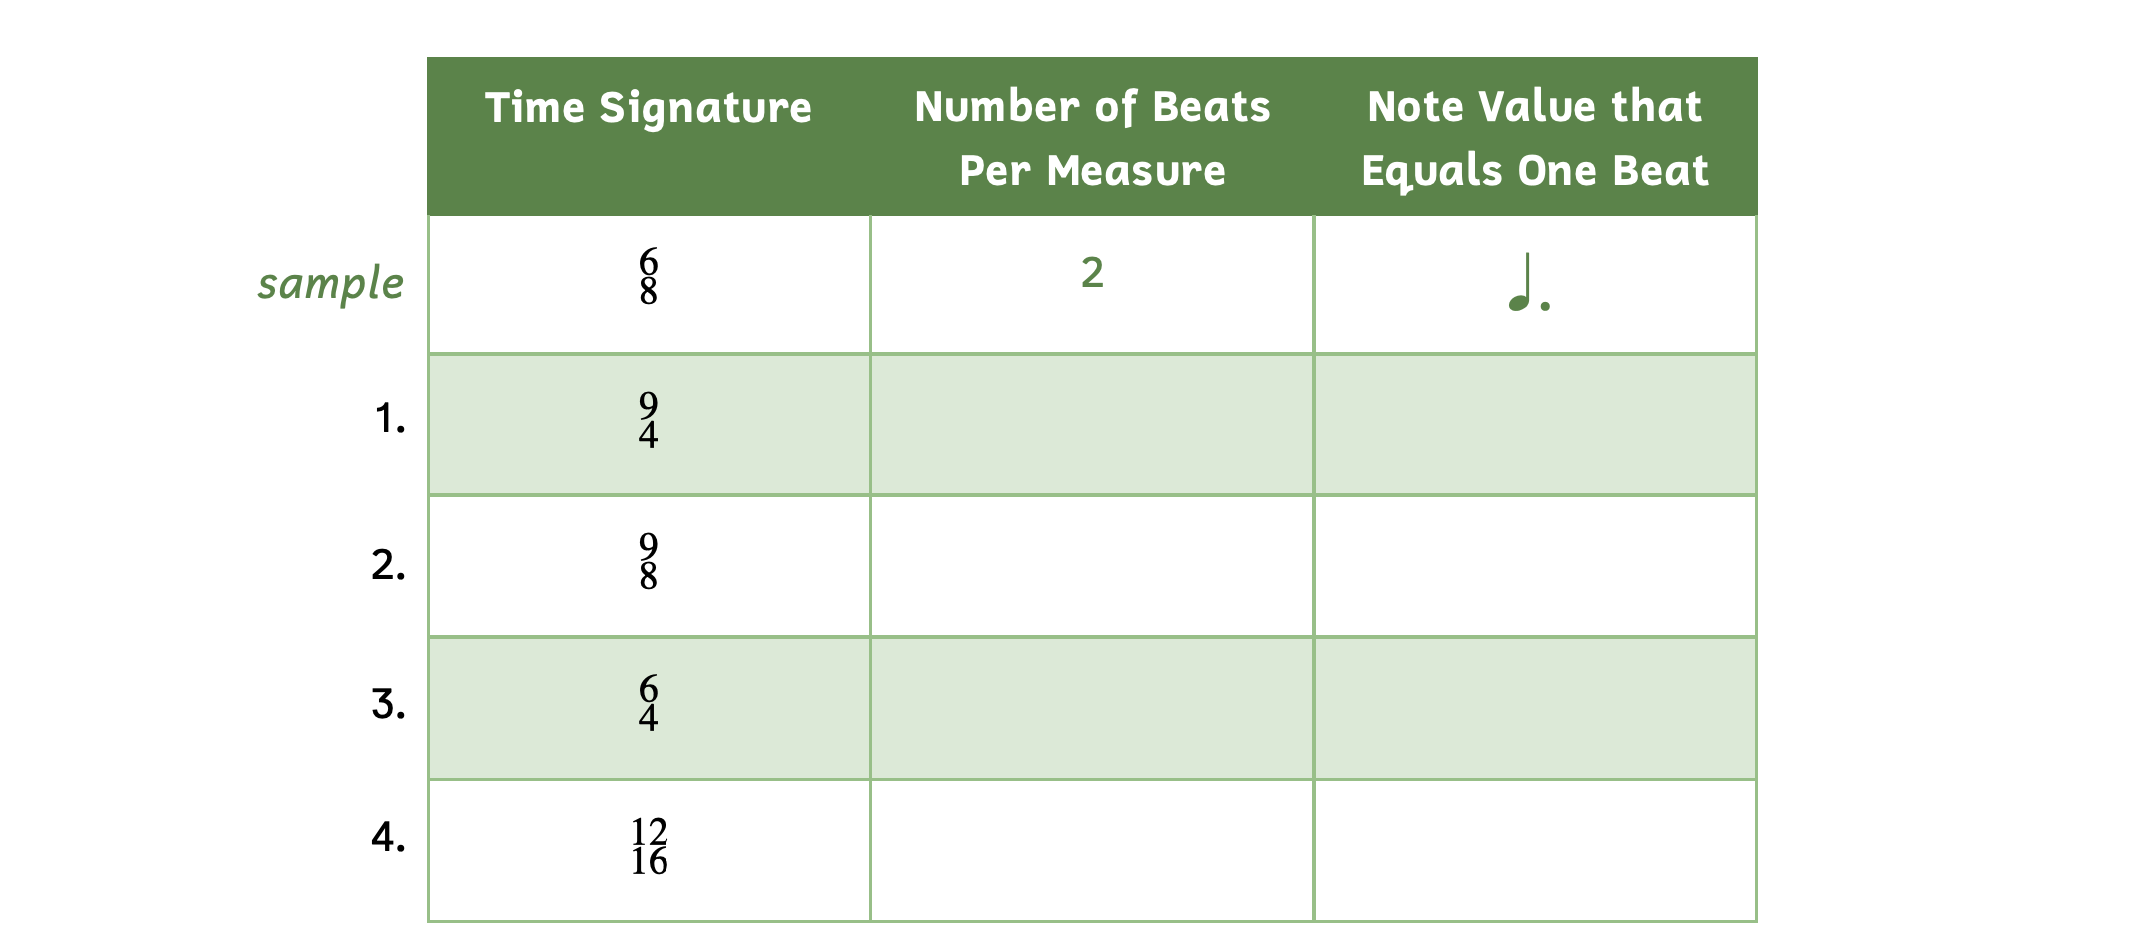 The first column shows the time signature. The second column asks for the number of beats per measure. The third column asks for the note value that equals one beat. The sample is in 6-8 and shows there are 2 beats per measure where a dotted quarter note would receive one beat. Number 1, time signature 9-4. Number 2, time signature 9-8. Number 3, time signature 6-4. Number 4, time signature 12-16.